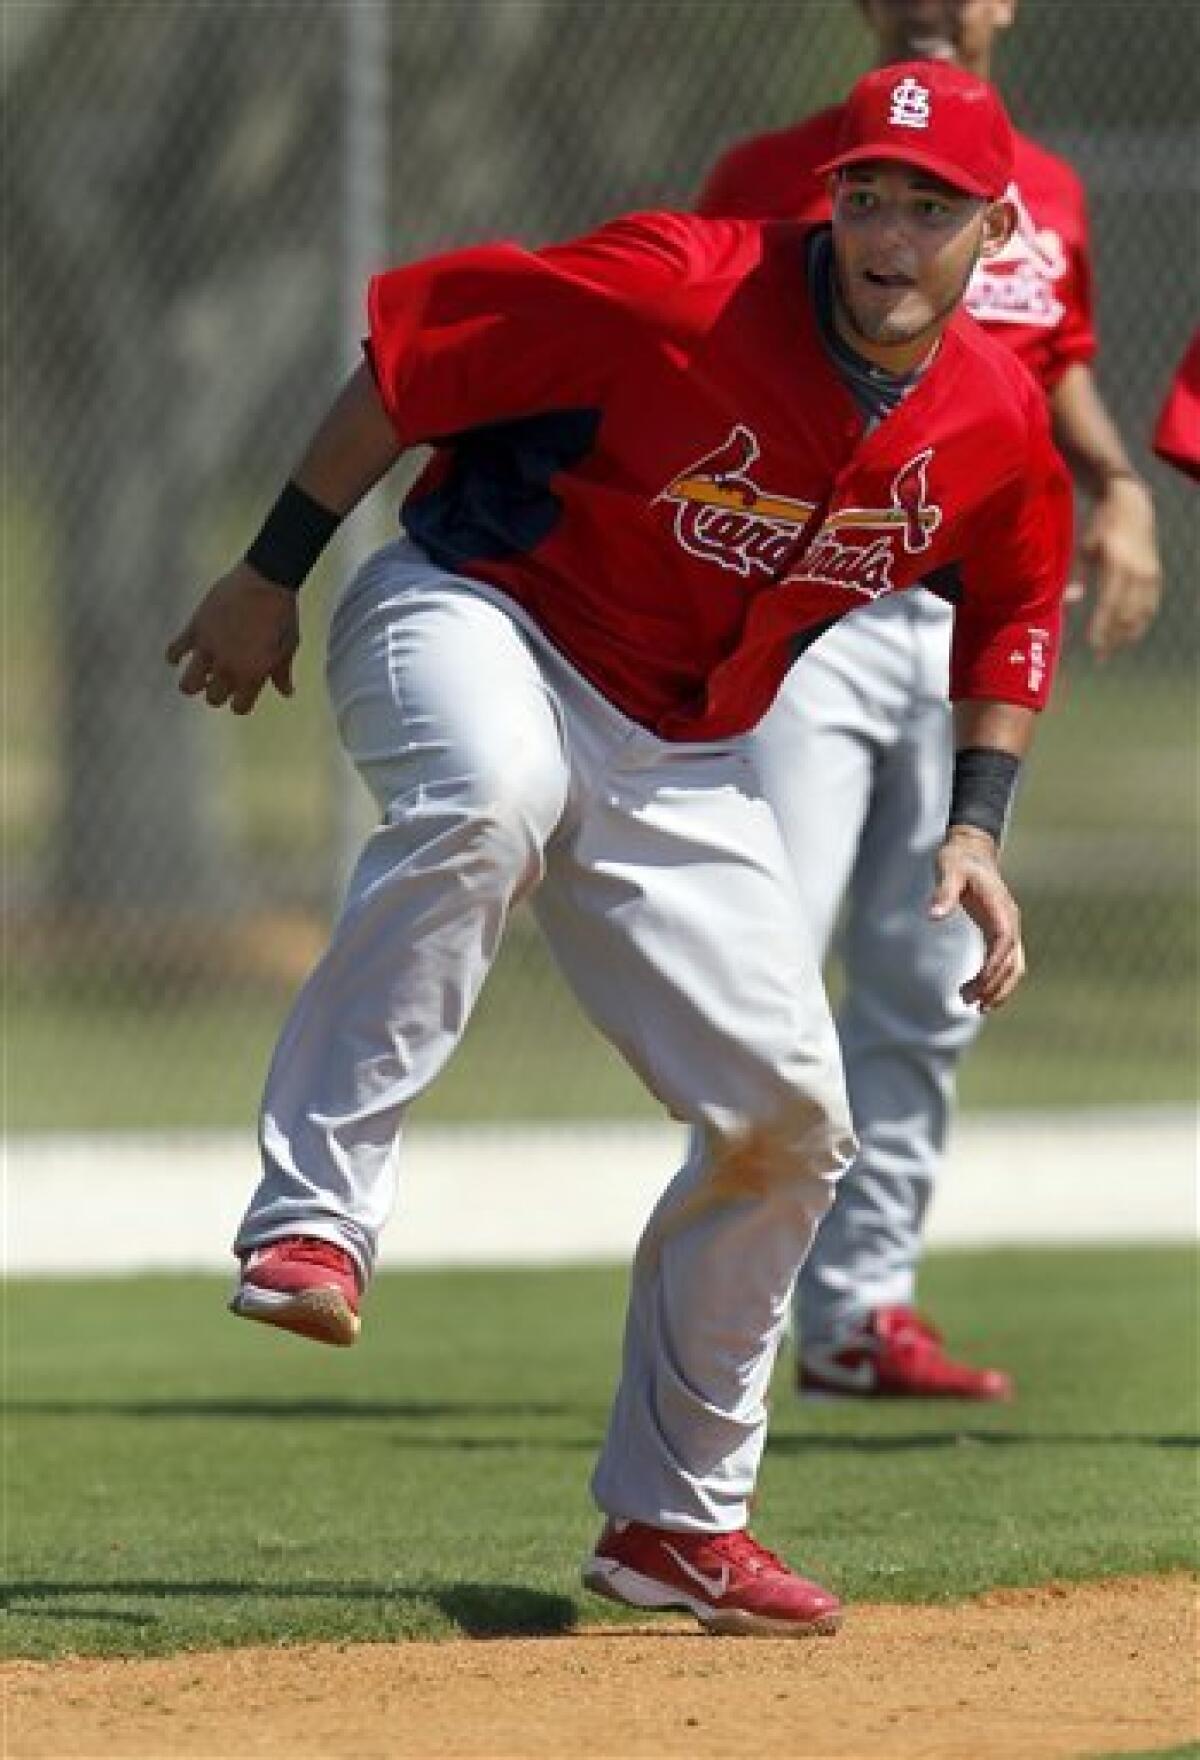 Yadier Molina on Expiring Contract: Cardinals Are 'Only Team I